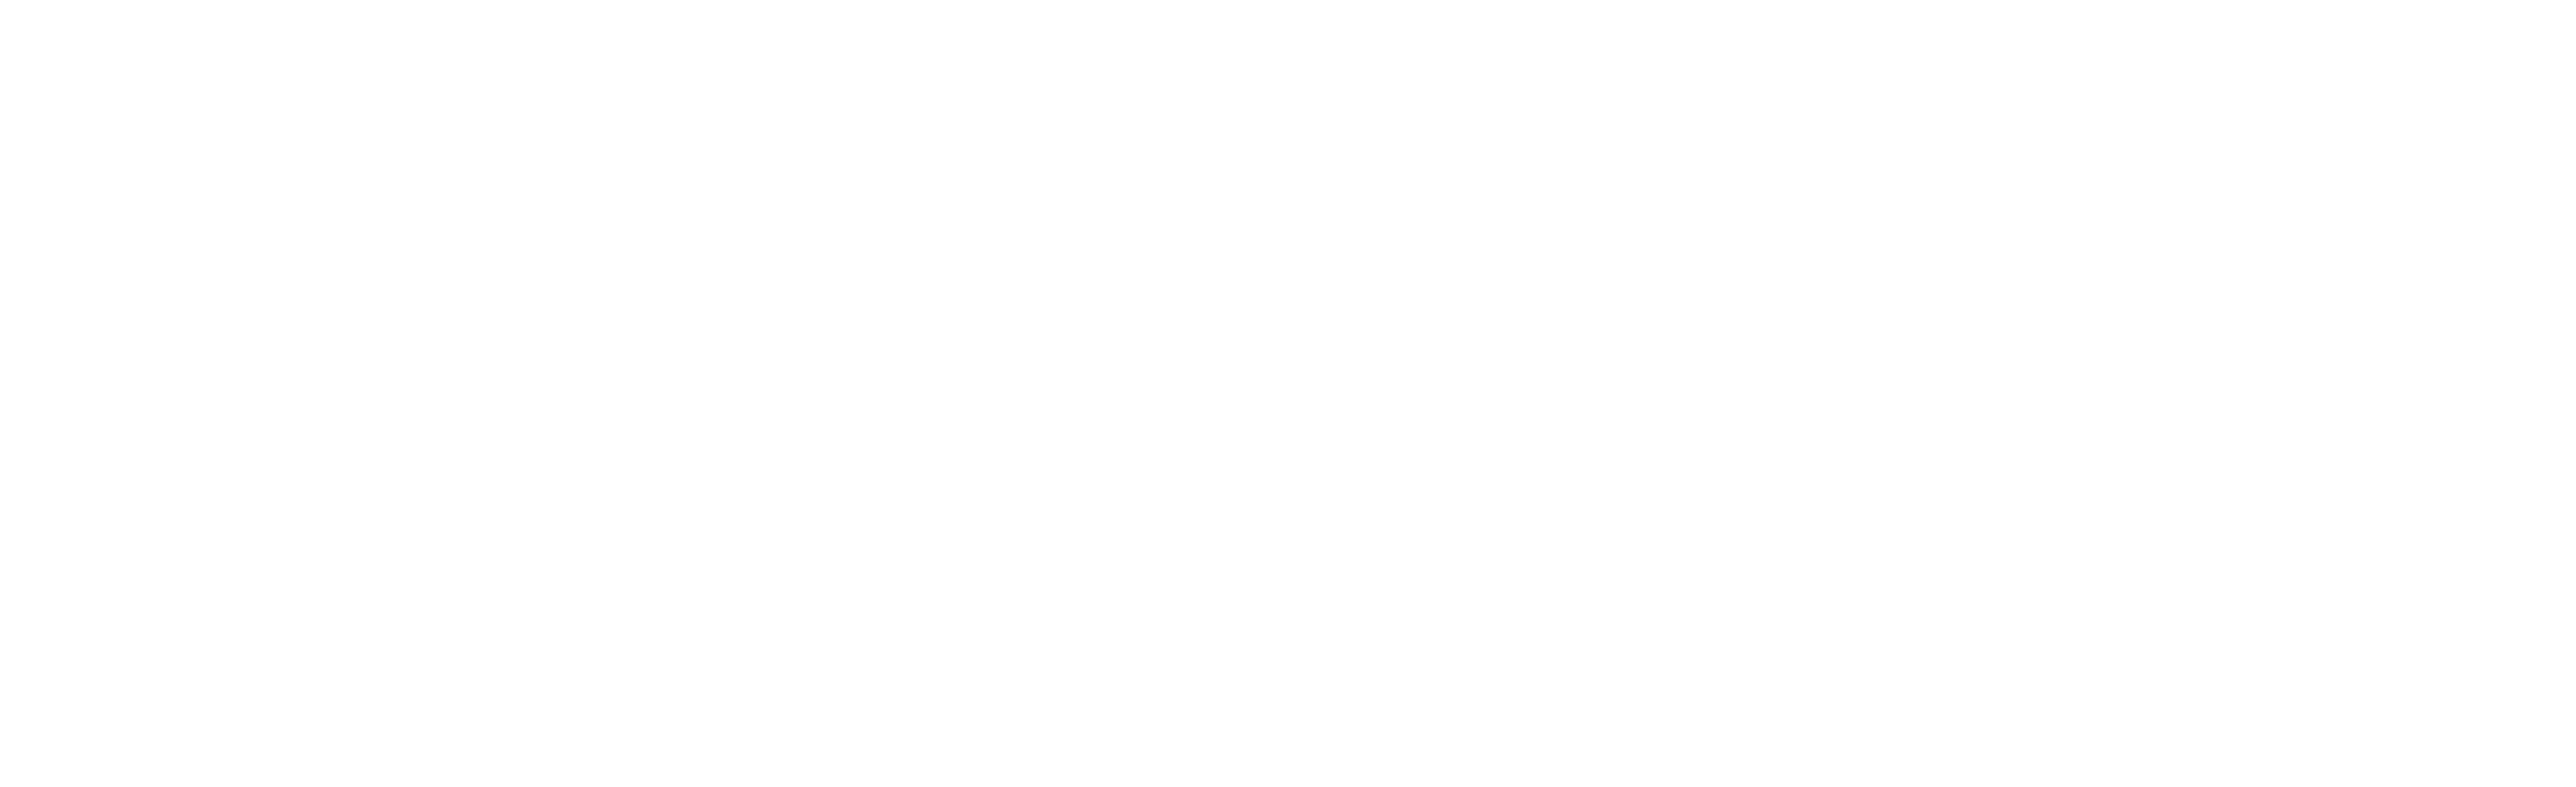 Local Marketing Made Easy White